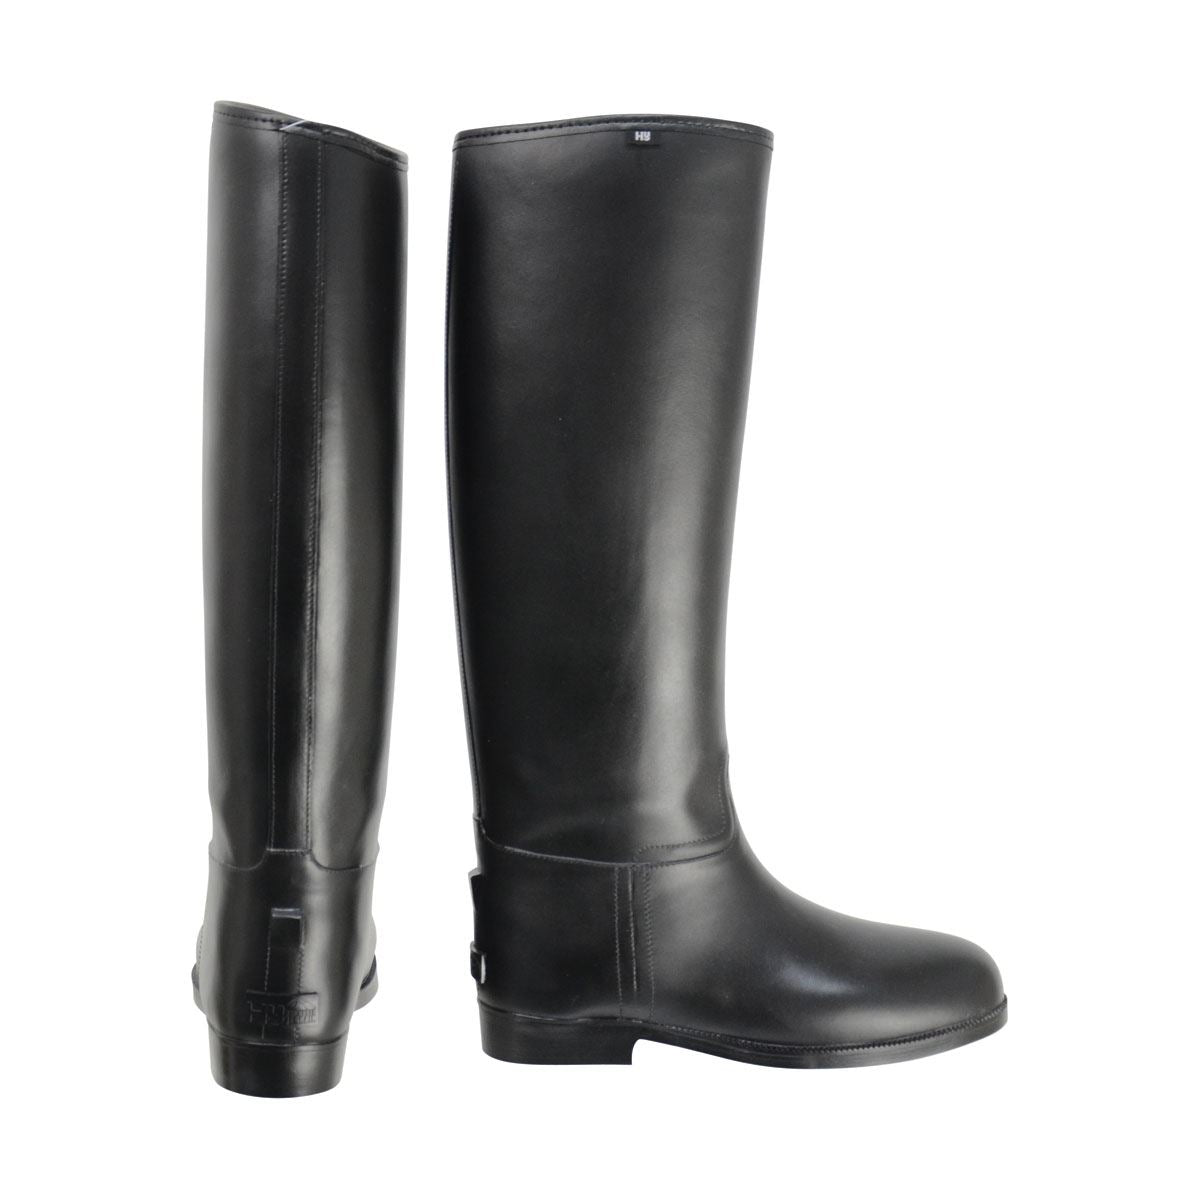 HyLAND Long Greenland Waterproof Riding Boots - Just Horse Riders